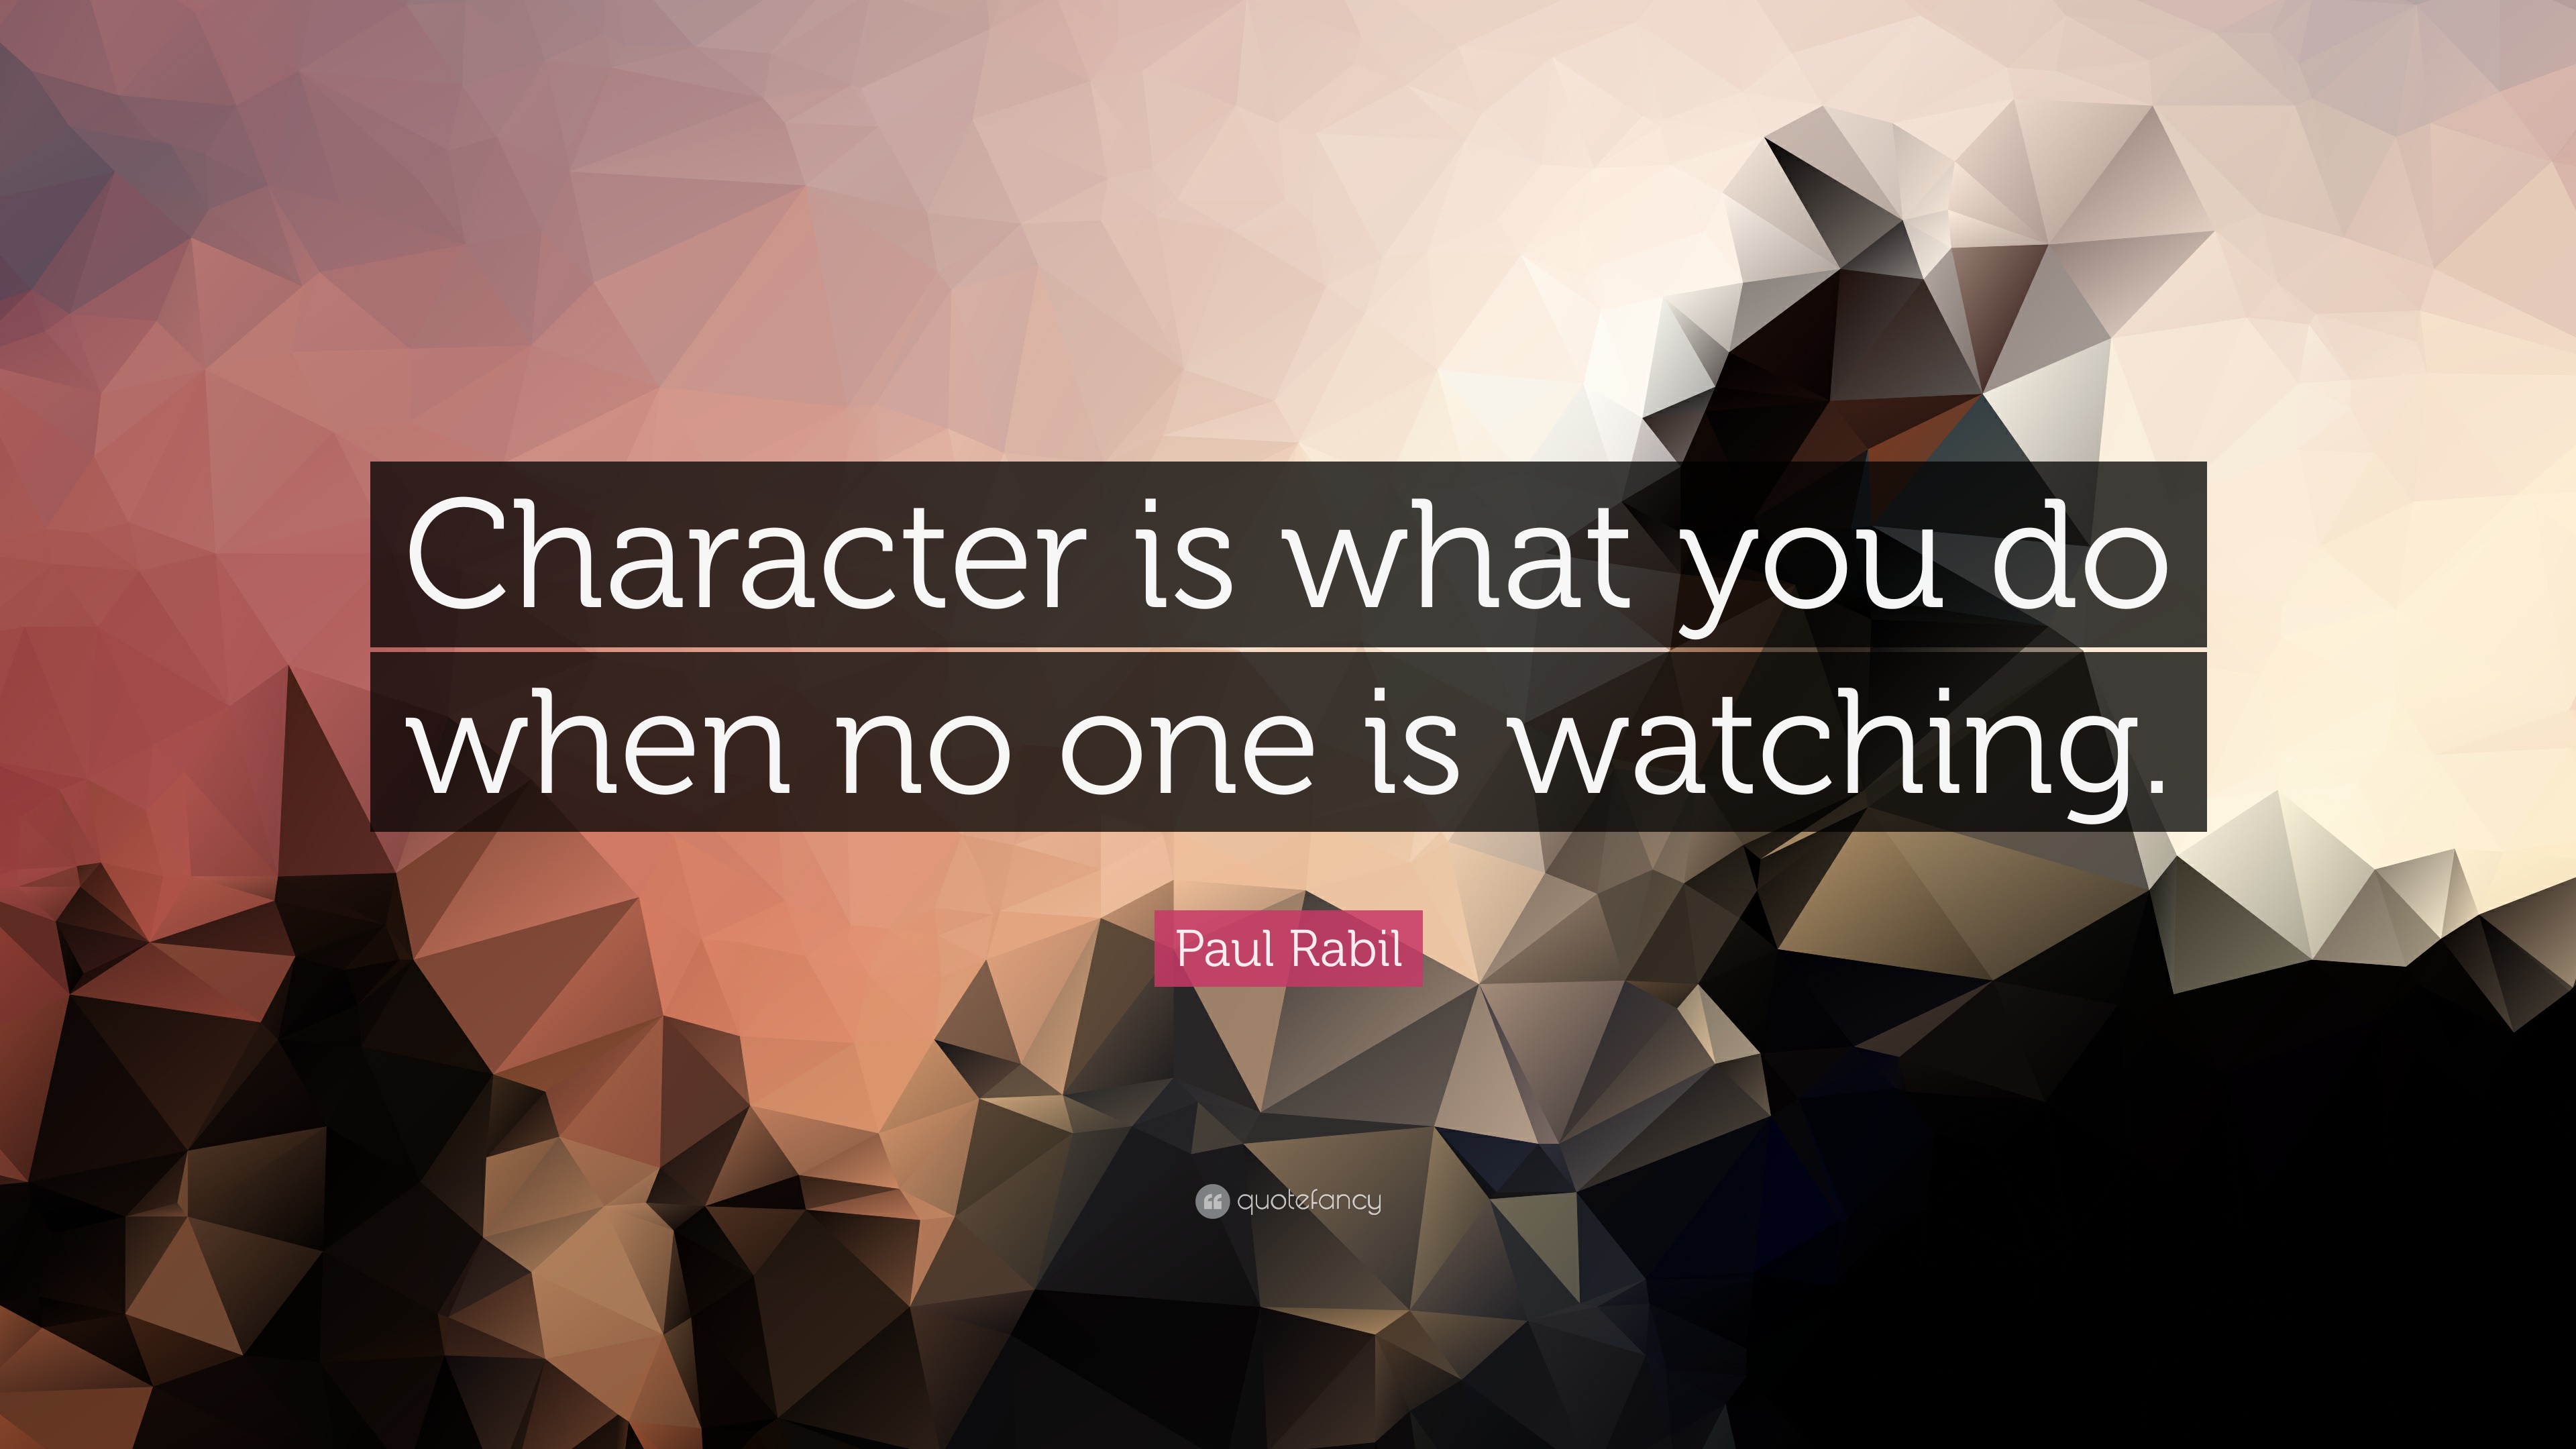 2818288 Paul Rabil Quote Character is what you do when no one is watching